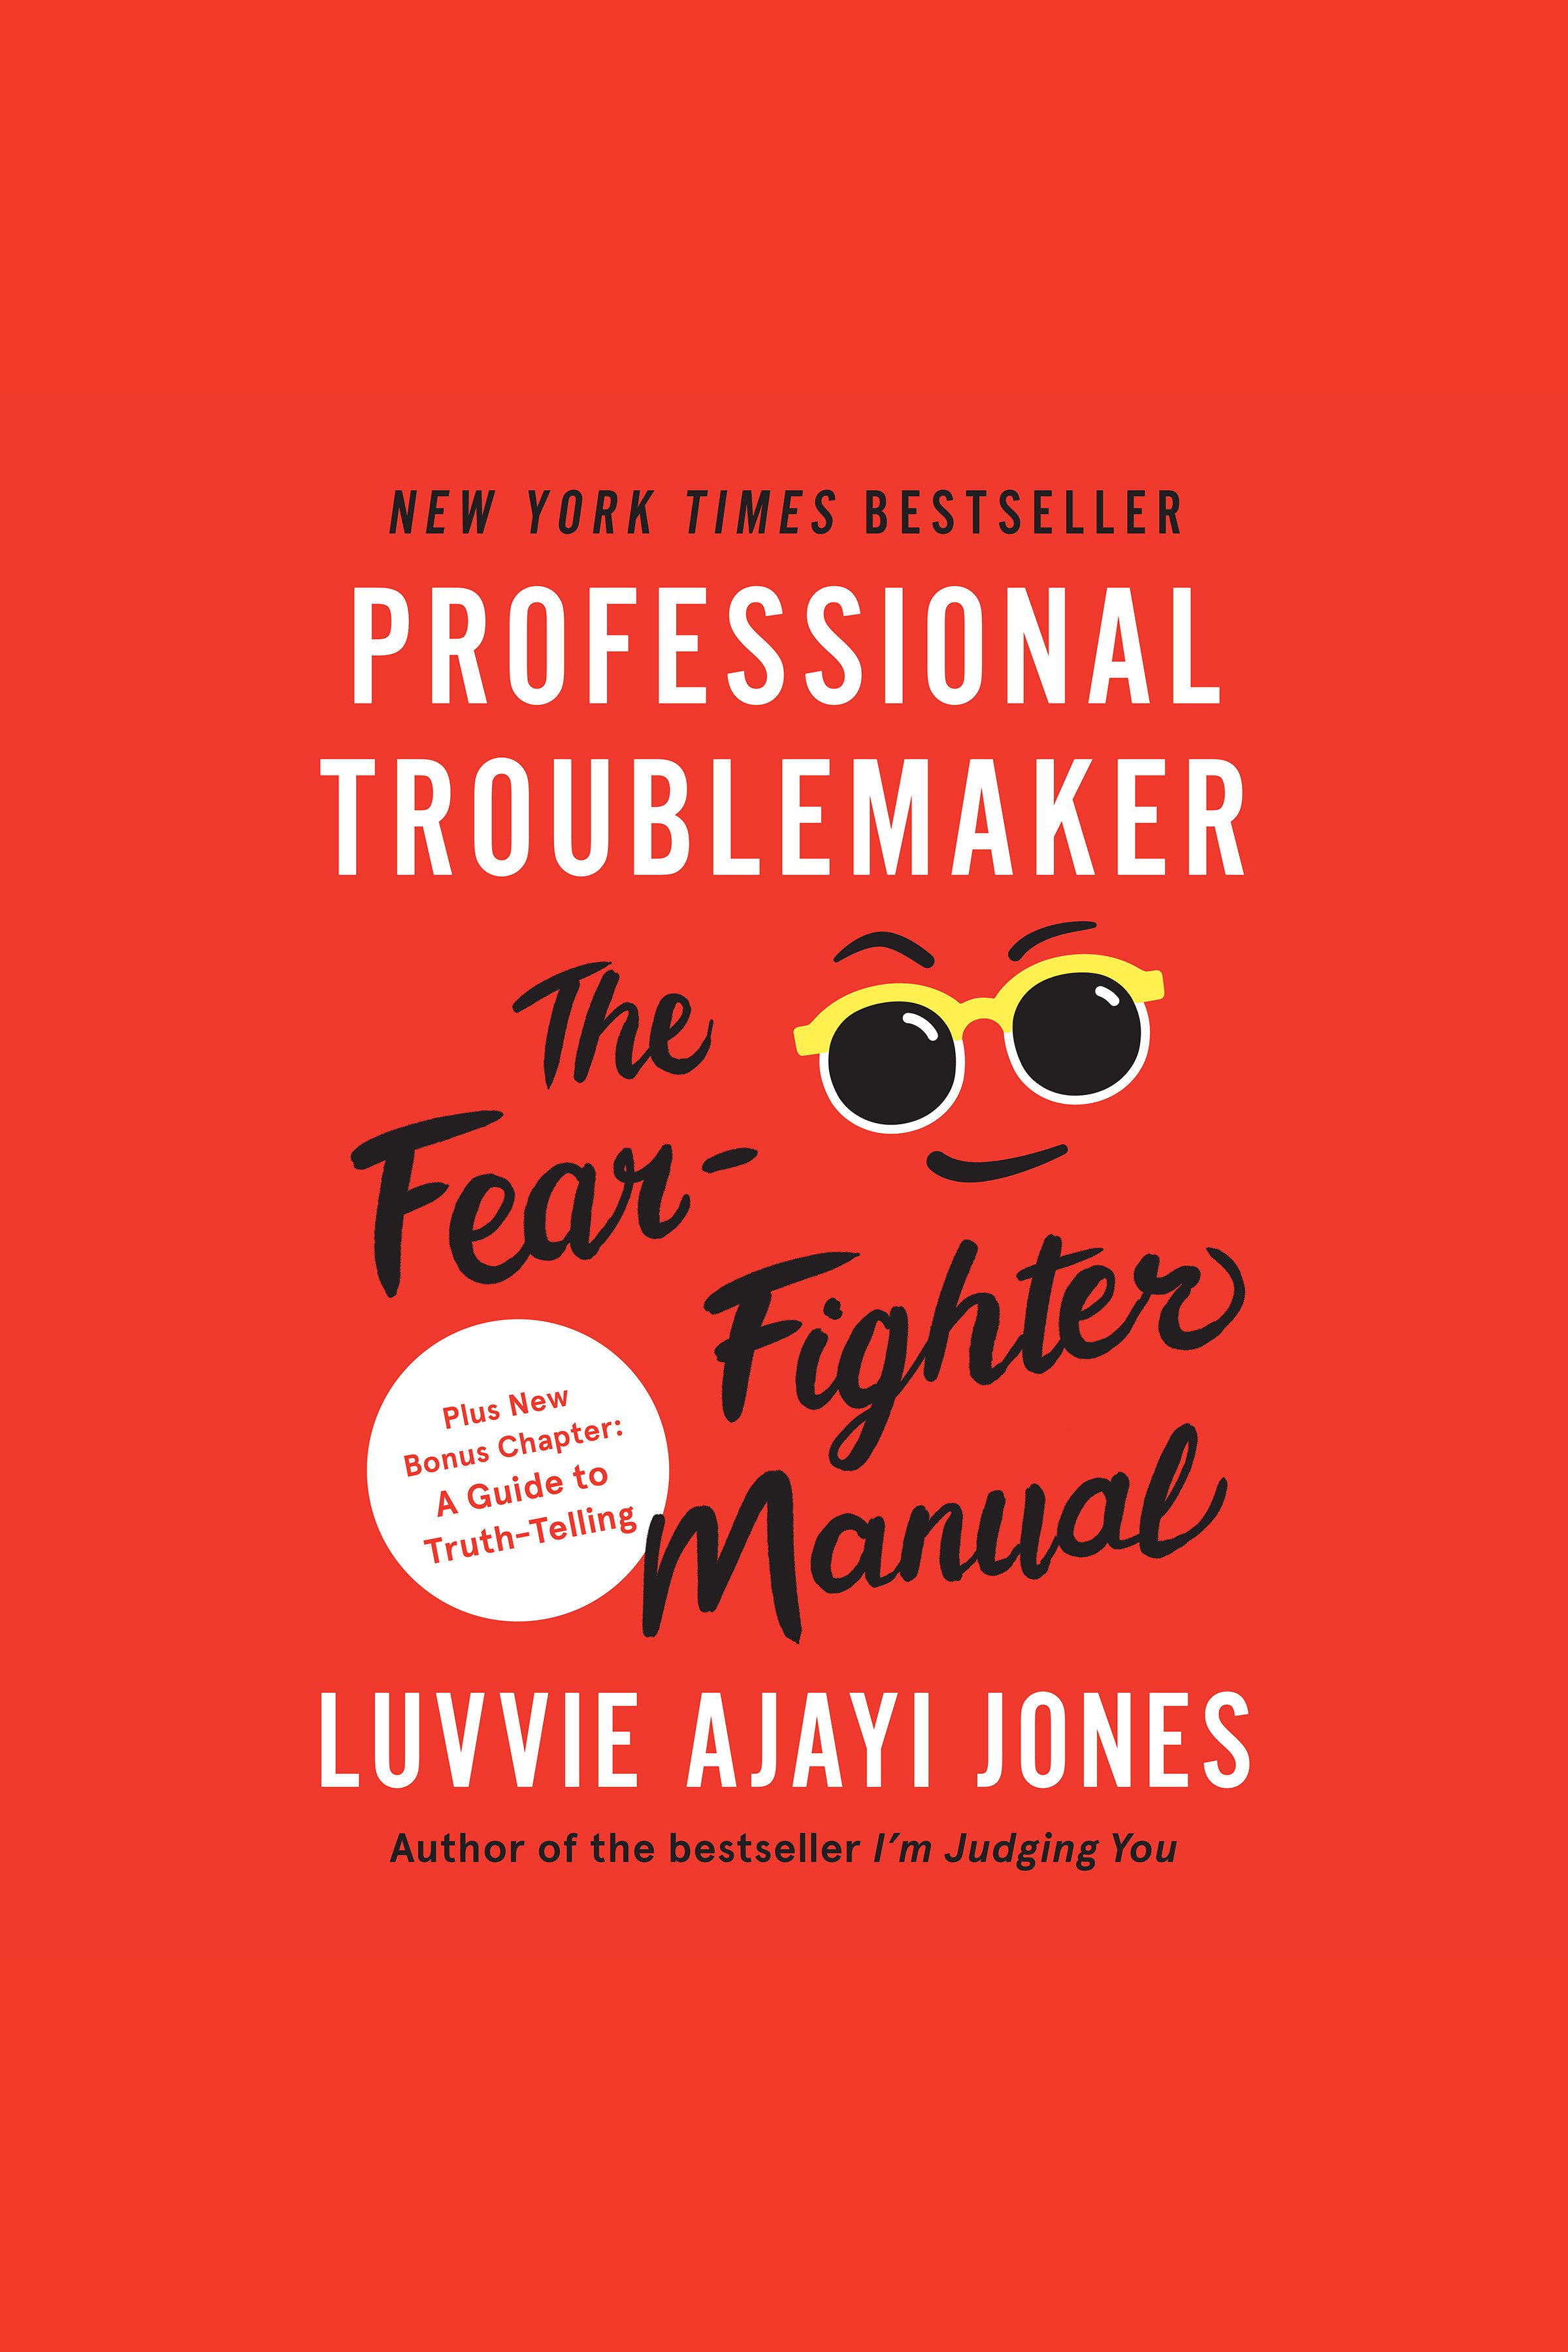 Professional Troublemaker The Fear-Fighter Manual cover image